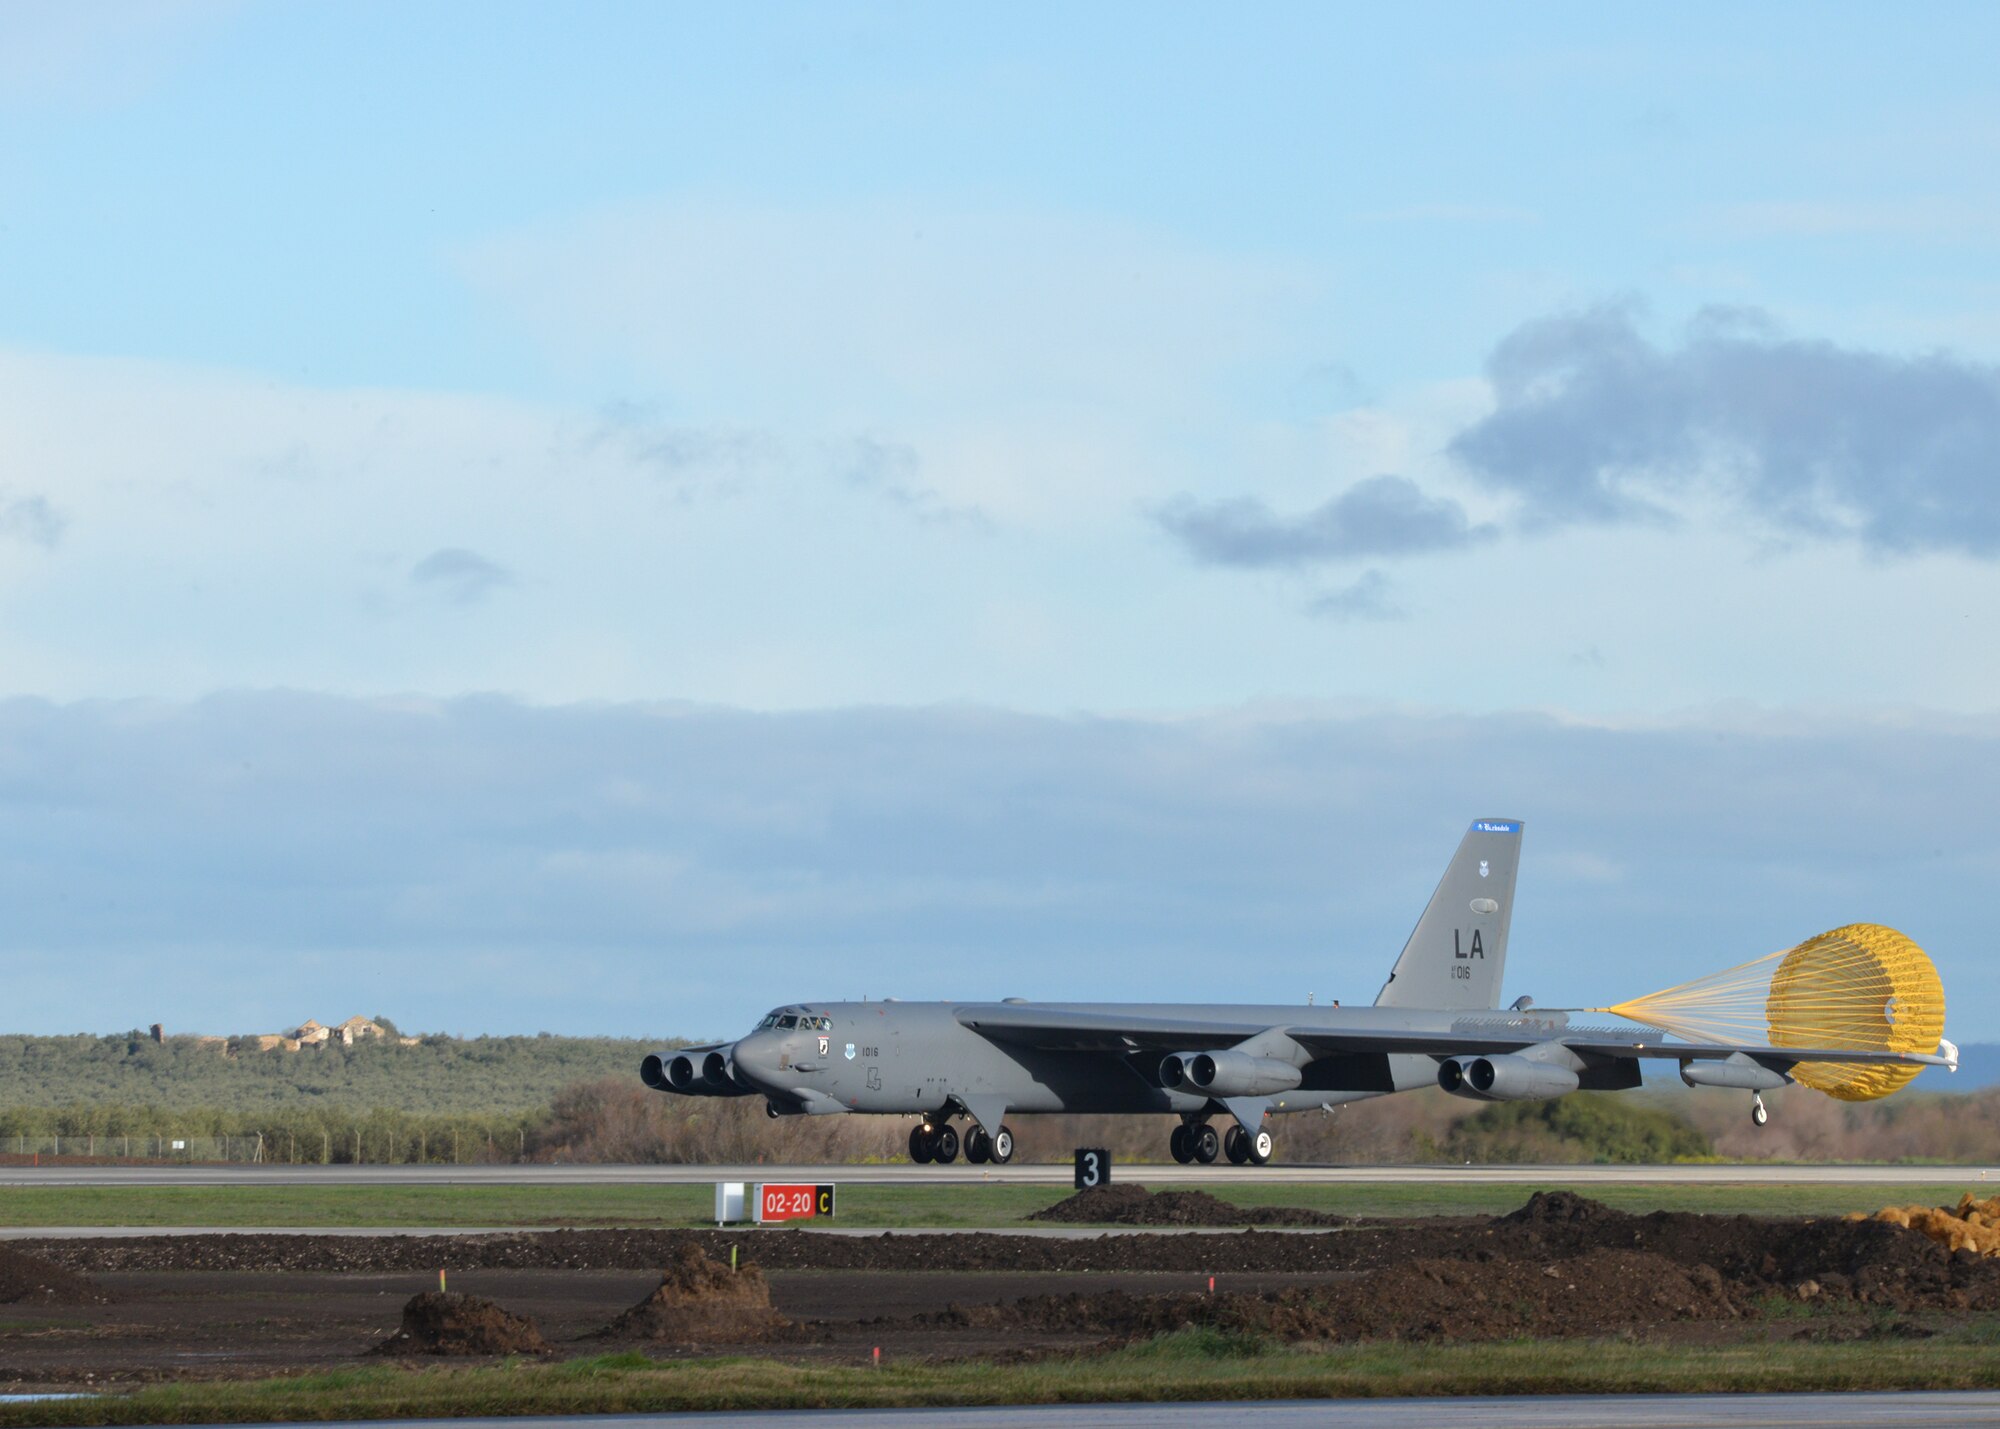 A B-52 Stratofortress arriving at Morón Air Base, Spain, deploys a drogue parachute to slow itself after landing, Feb. 27, 2016. Three B-52s from Barksdale Air Force Base, La., will be temporarily reassigned to the 2nd Expeditionary Bomb Group for the duration of a large-scale NATO military exercise in which they will participate. The Norwegian-led Cold Response 16 will involve approximately 16,000 troops from a dozen allied and partner nations and last nearly two weeks. (U.S. Air Force photo/Senior Airman Joseph Raatz)